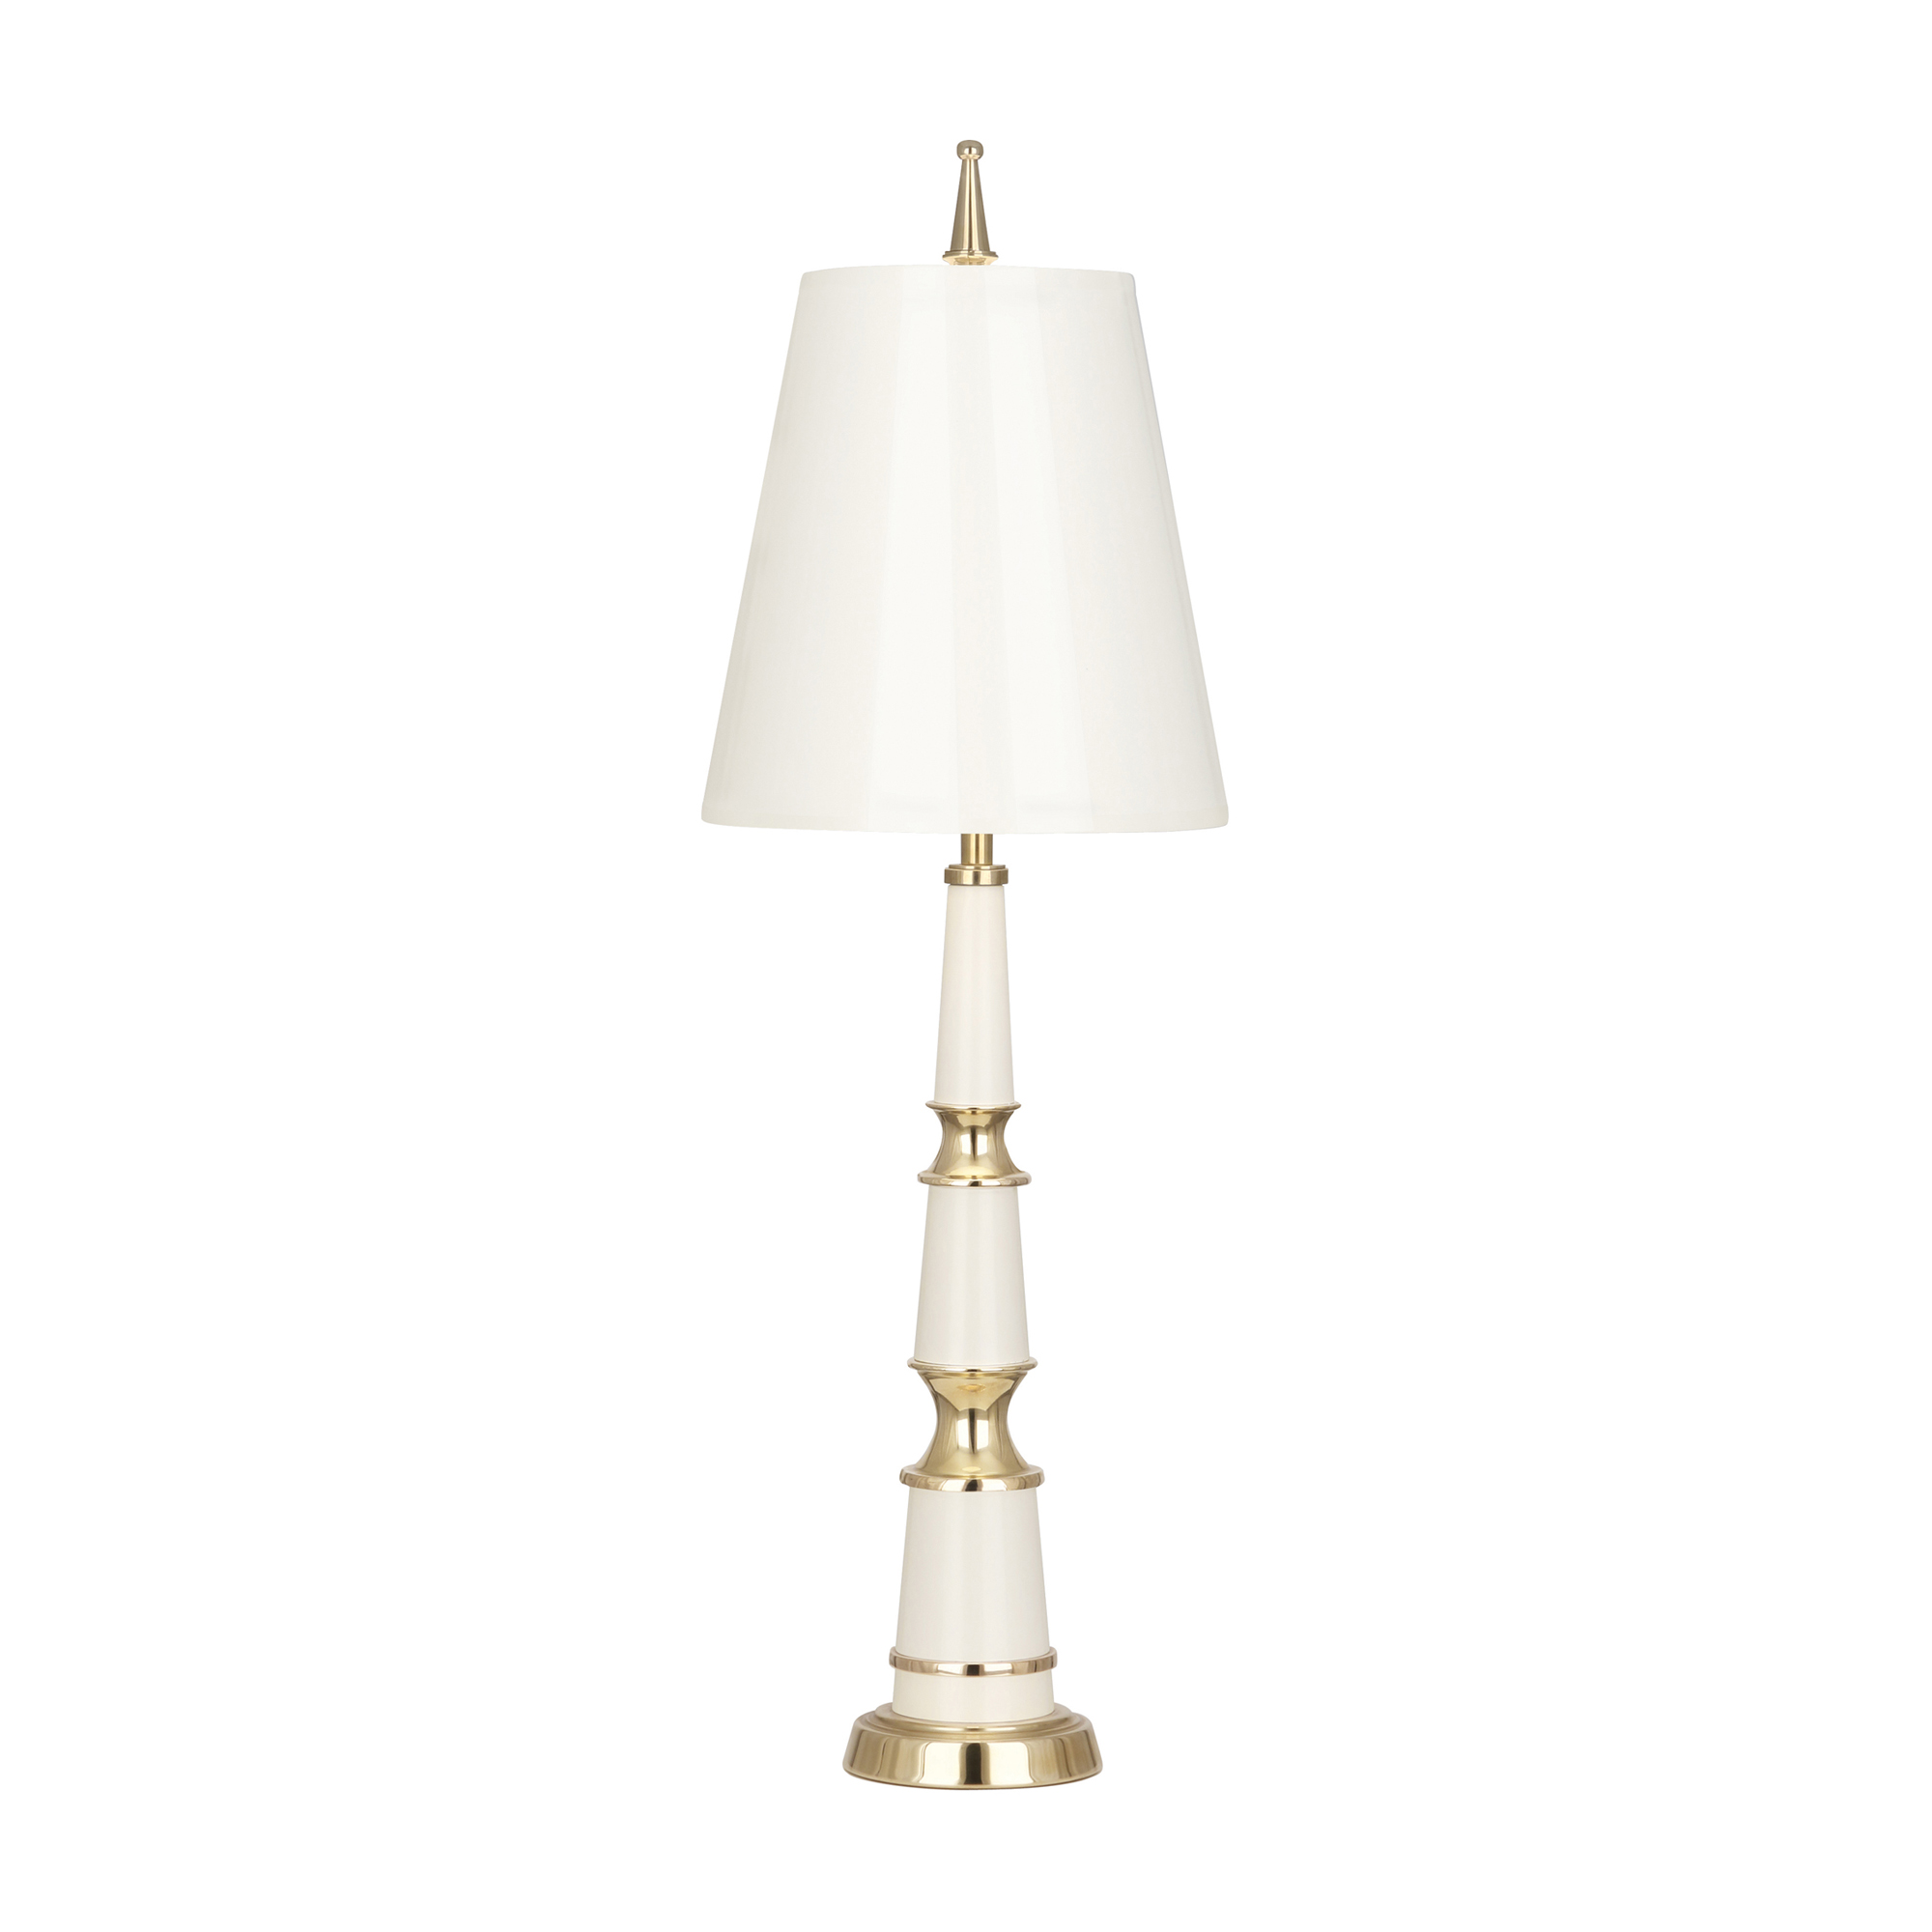 Jonathan Adler Versailles Accent Lamp Style #W900